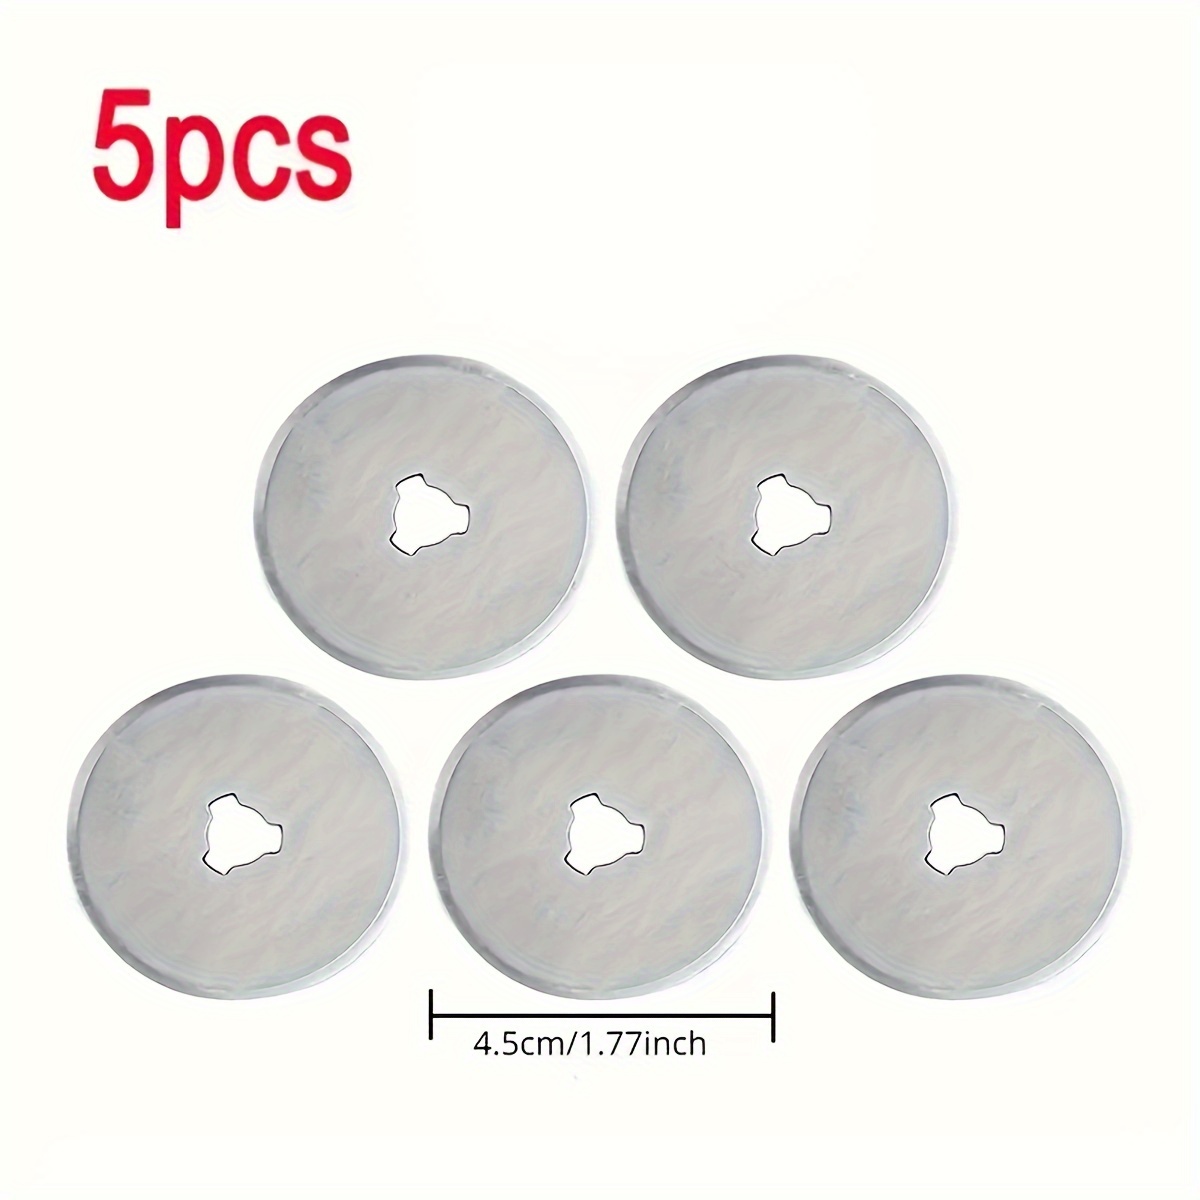 45mm Cutter Sewing with 5PCS 45mm Blades Round Cloth Guiding